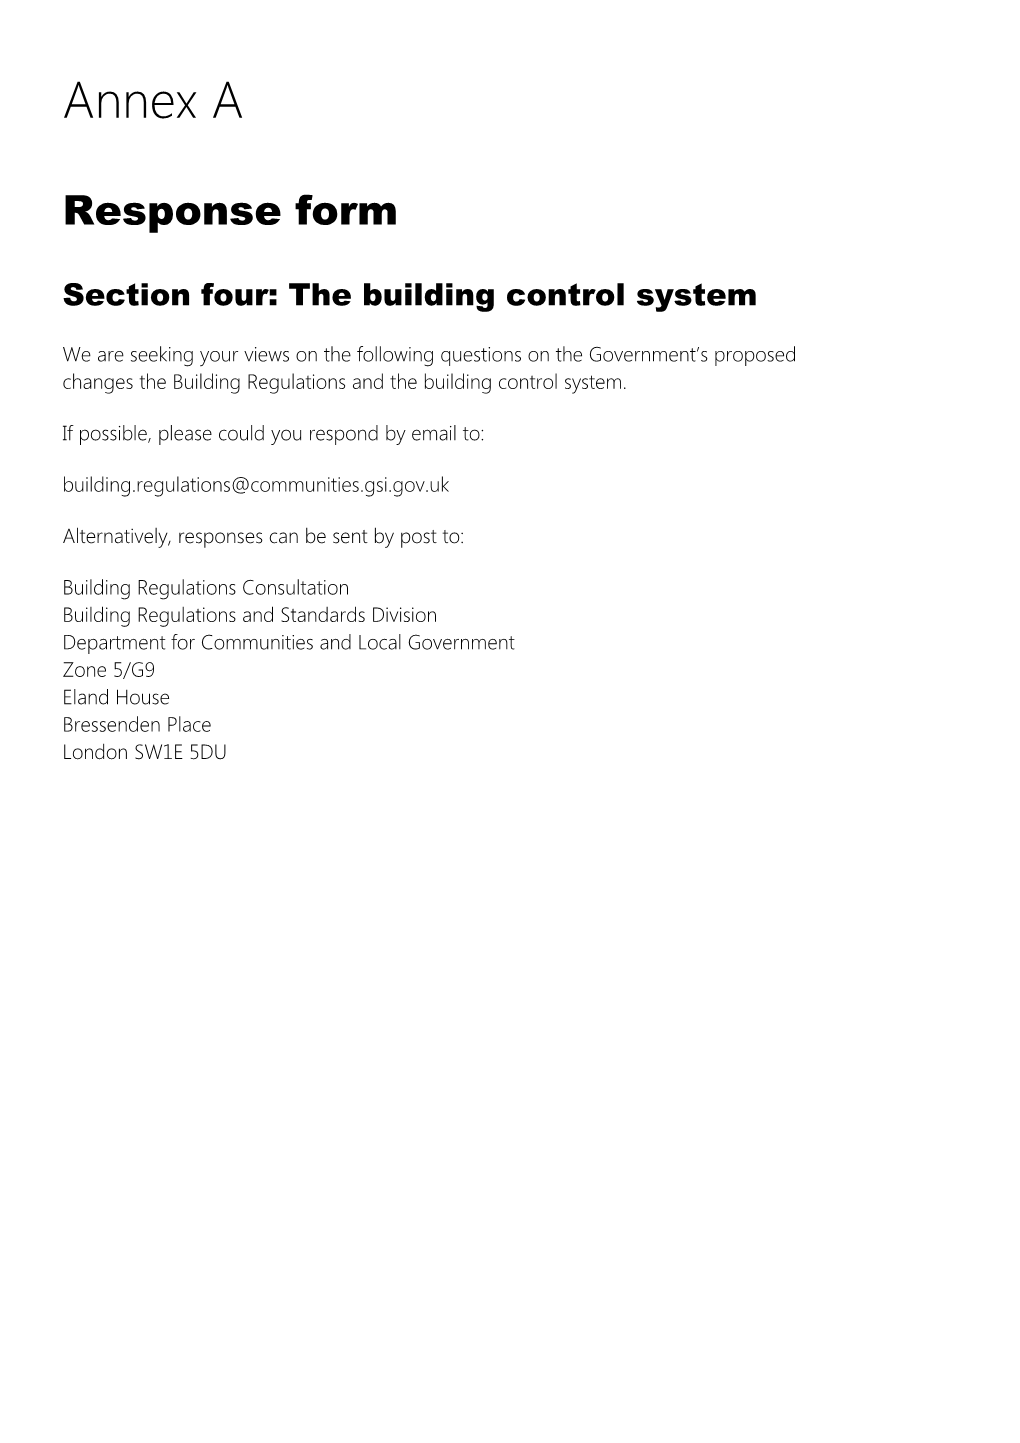 Section Four: the Building Control System